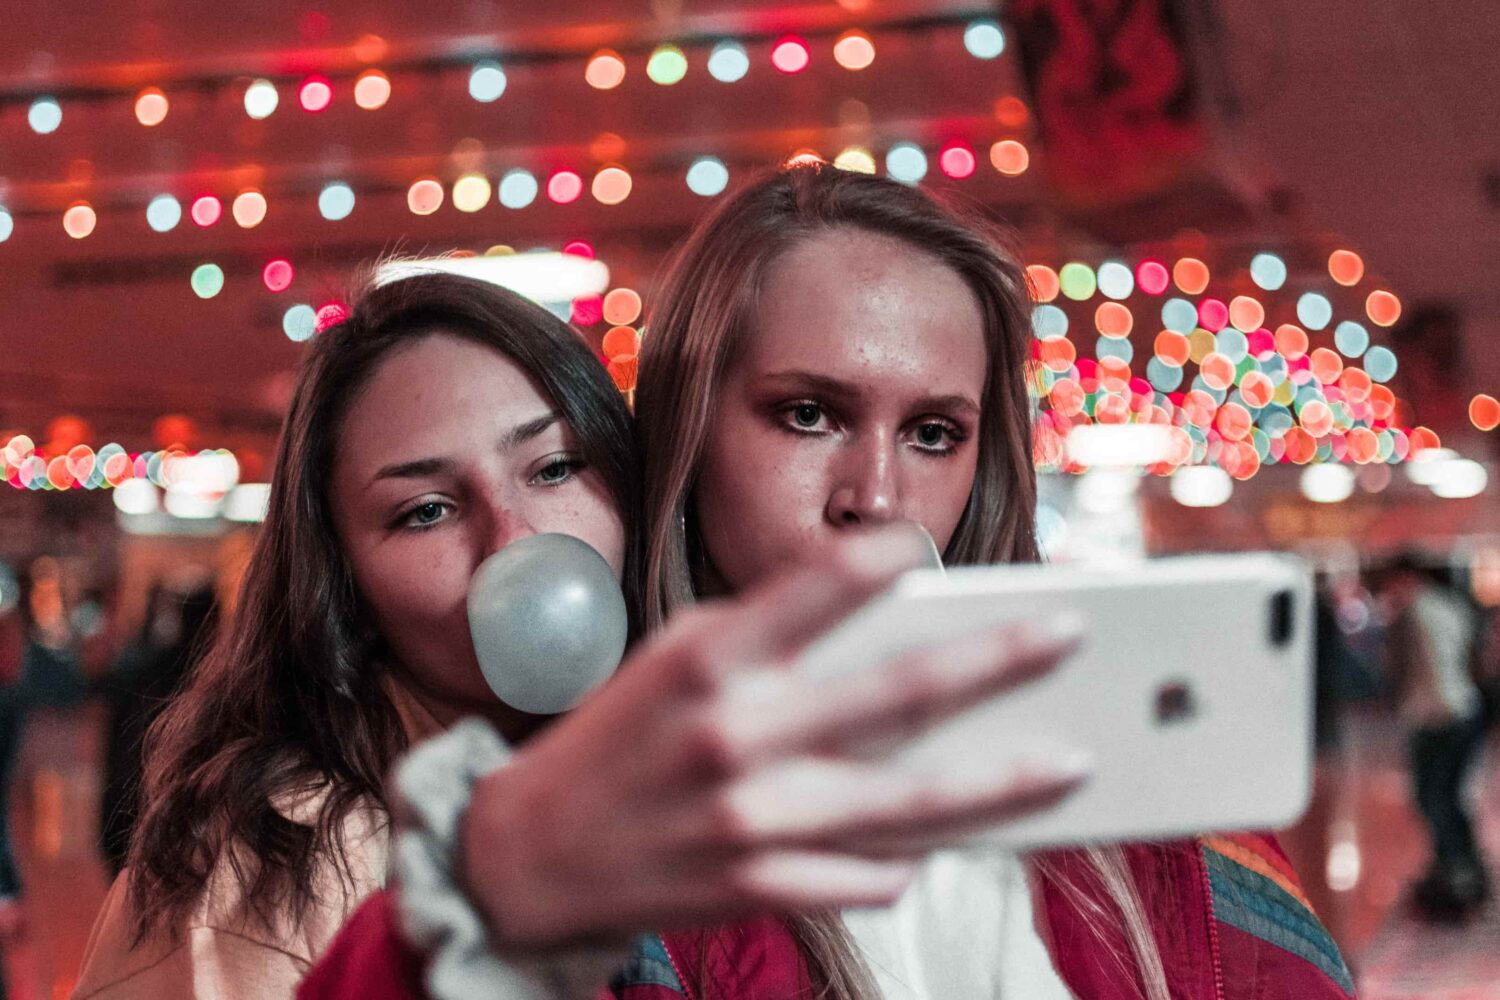 Two female friends are taking a selfie with an iPhone 13 in this photograph from Unsplash